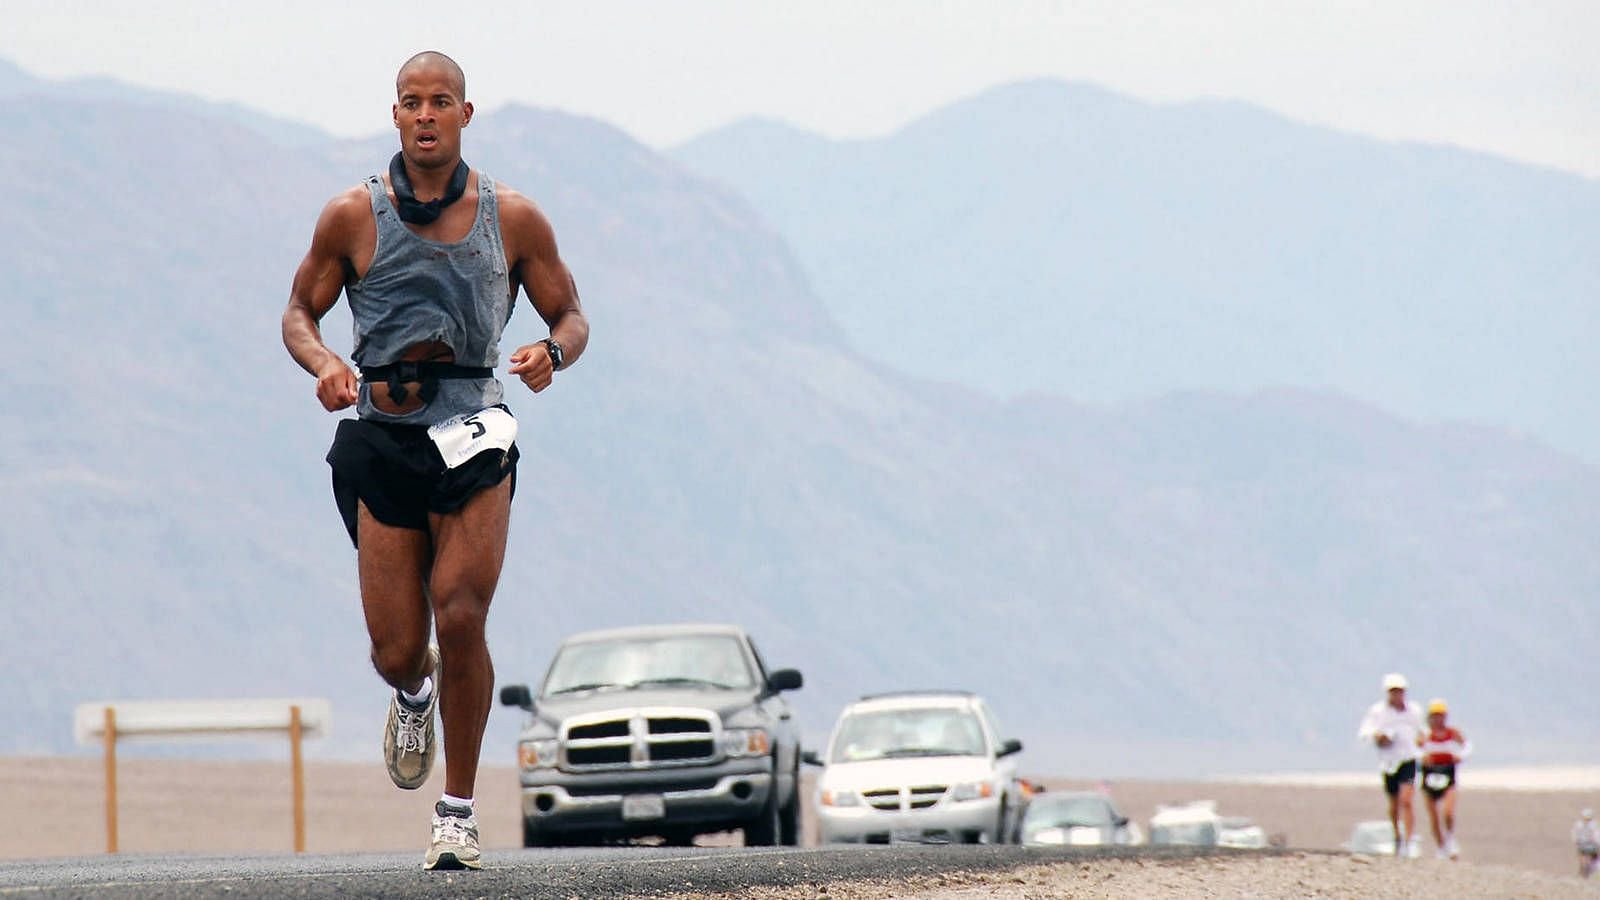 David Goggins&#039; pull-ups are an inspiration to many. (Image by Wallpapers.com/ Vadimarseni)